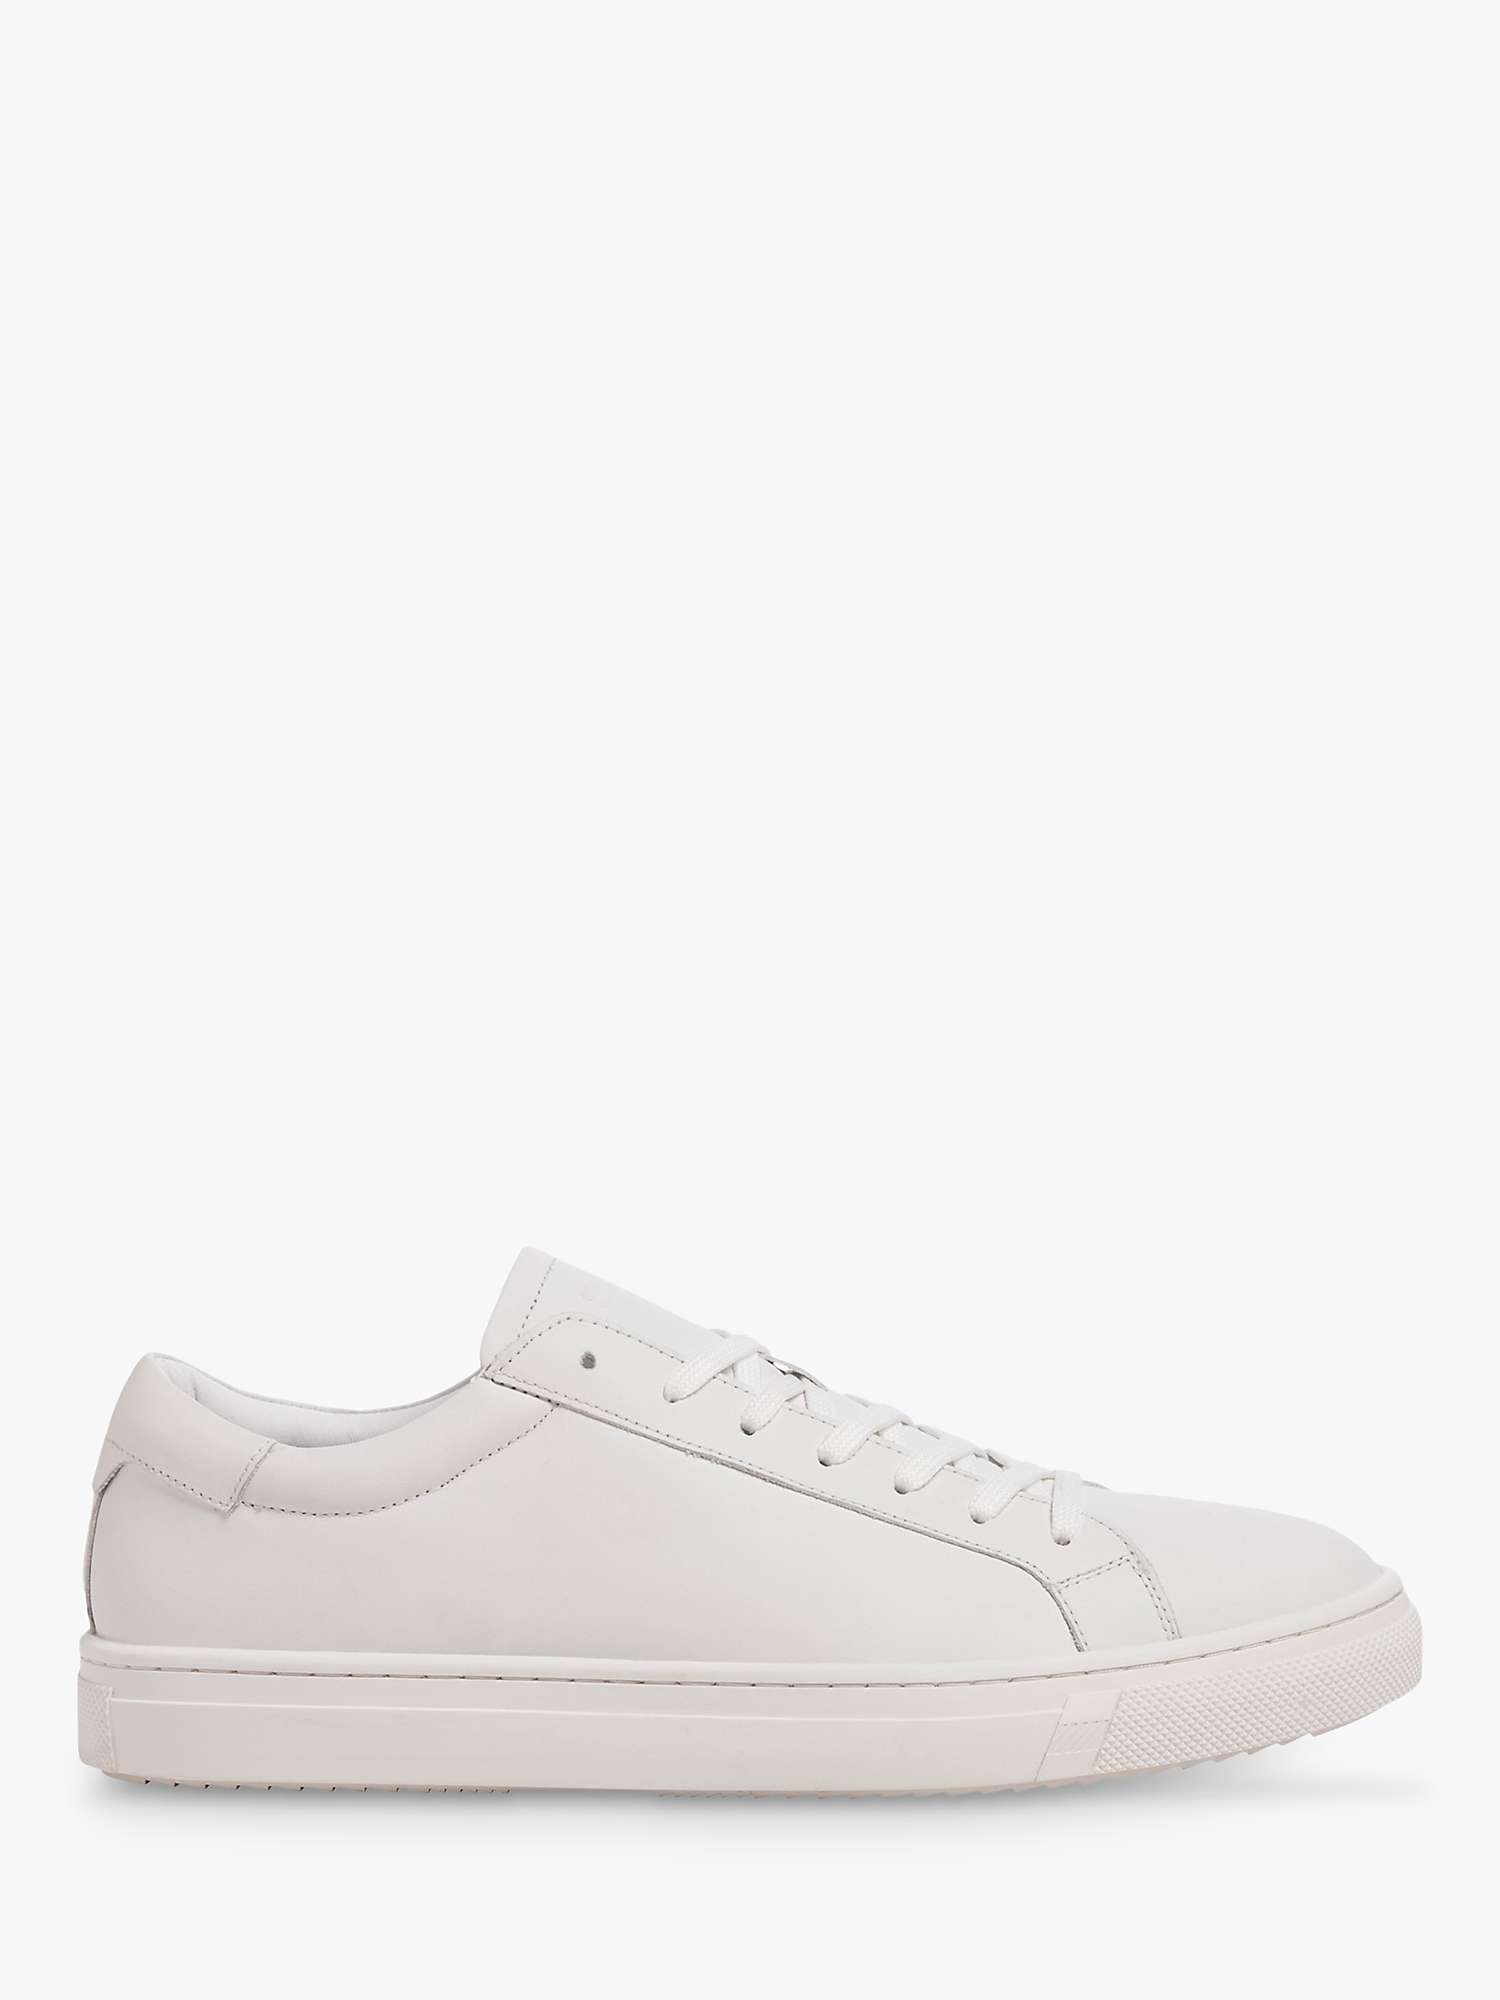 Buy Jack & Jones Radcliffe Leather Trainers, White Online at johnlewis.com